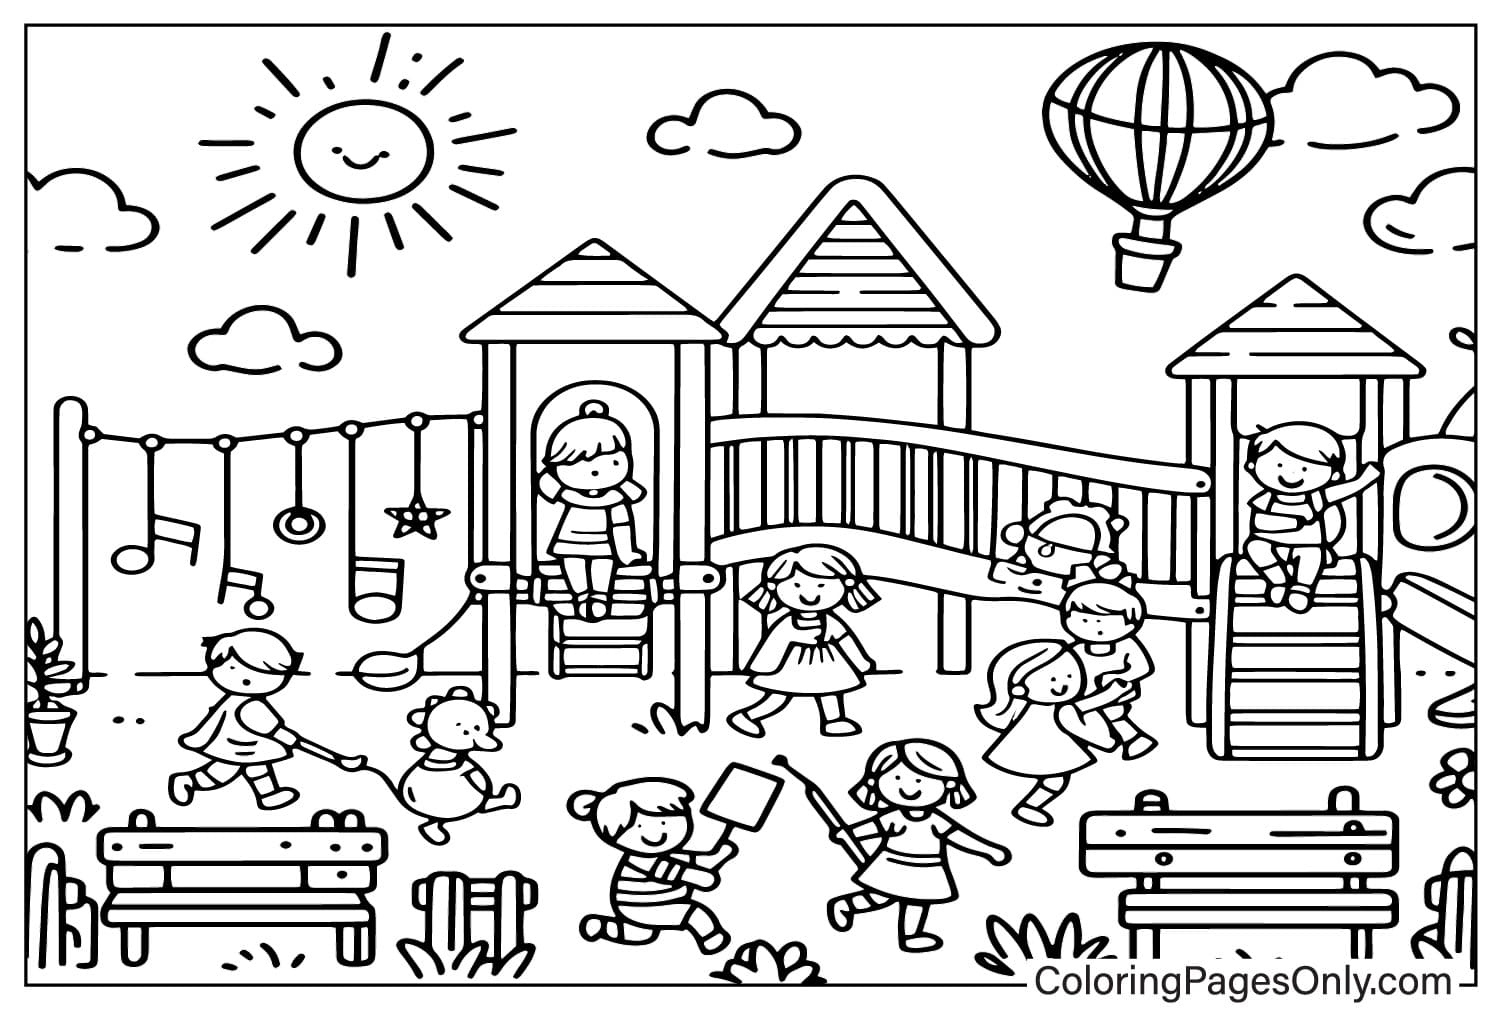 Playground Coloring Page to Print from Playground